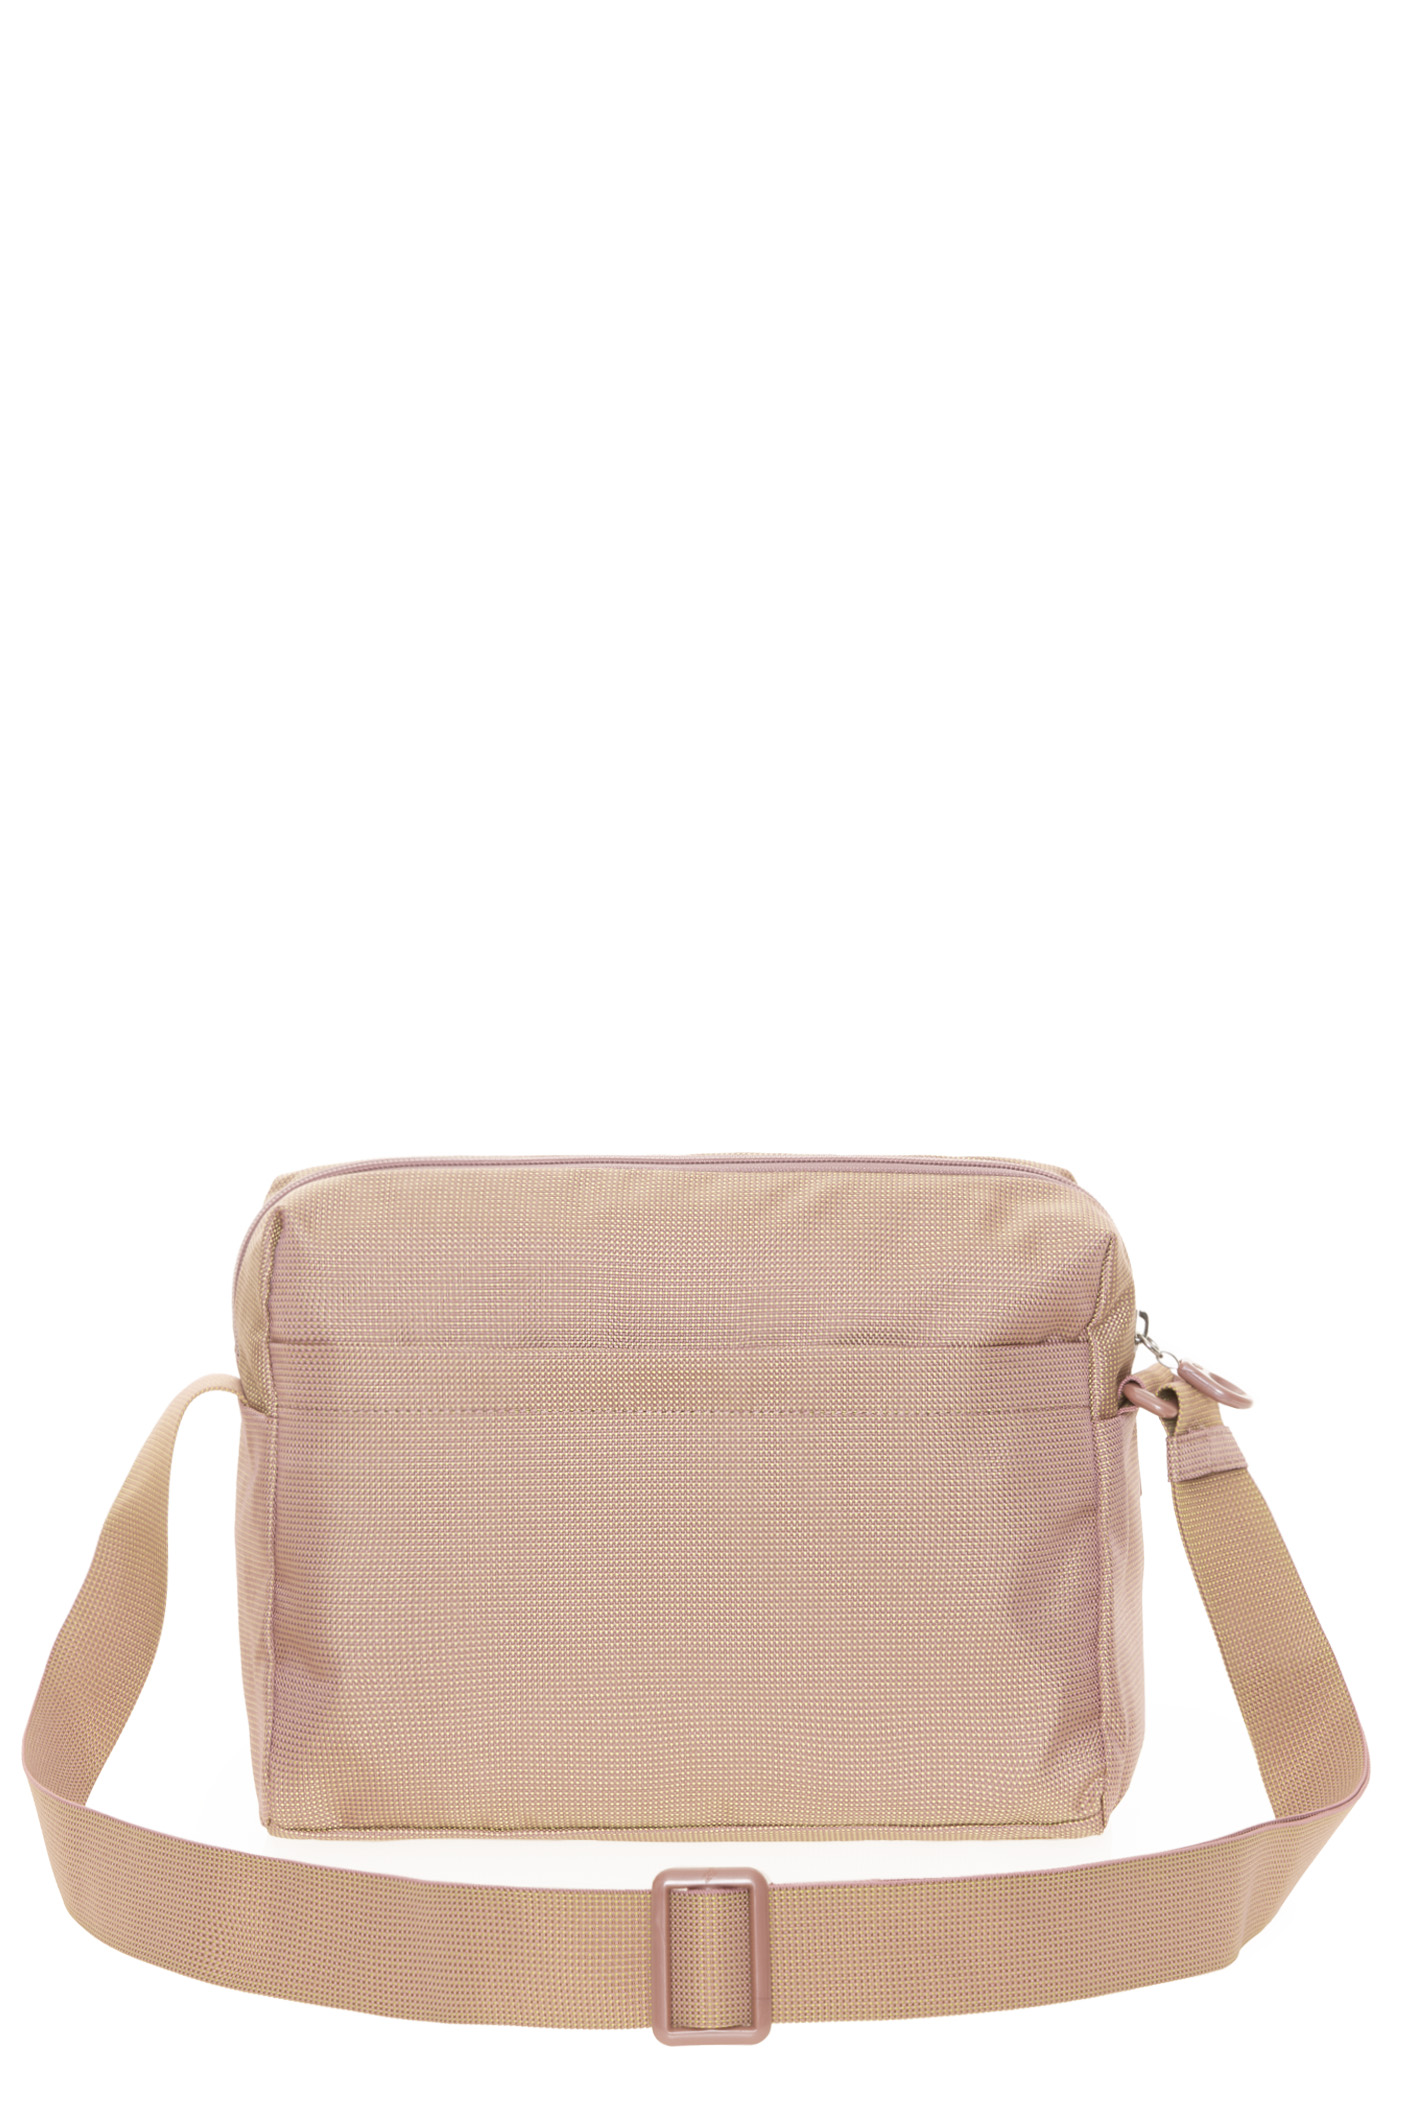 (image for) Borsa a tracolla F0816222-0366 mandarina duck outlet online